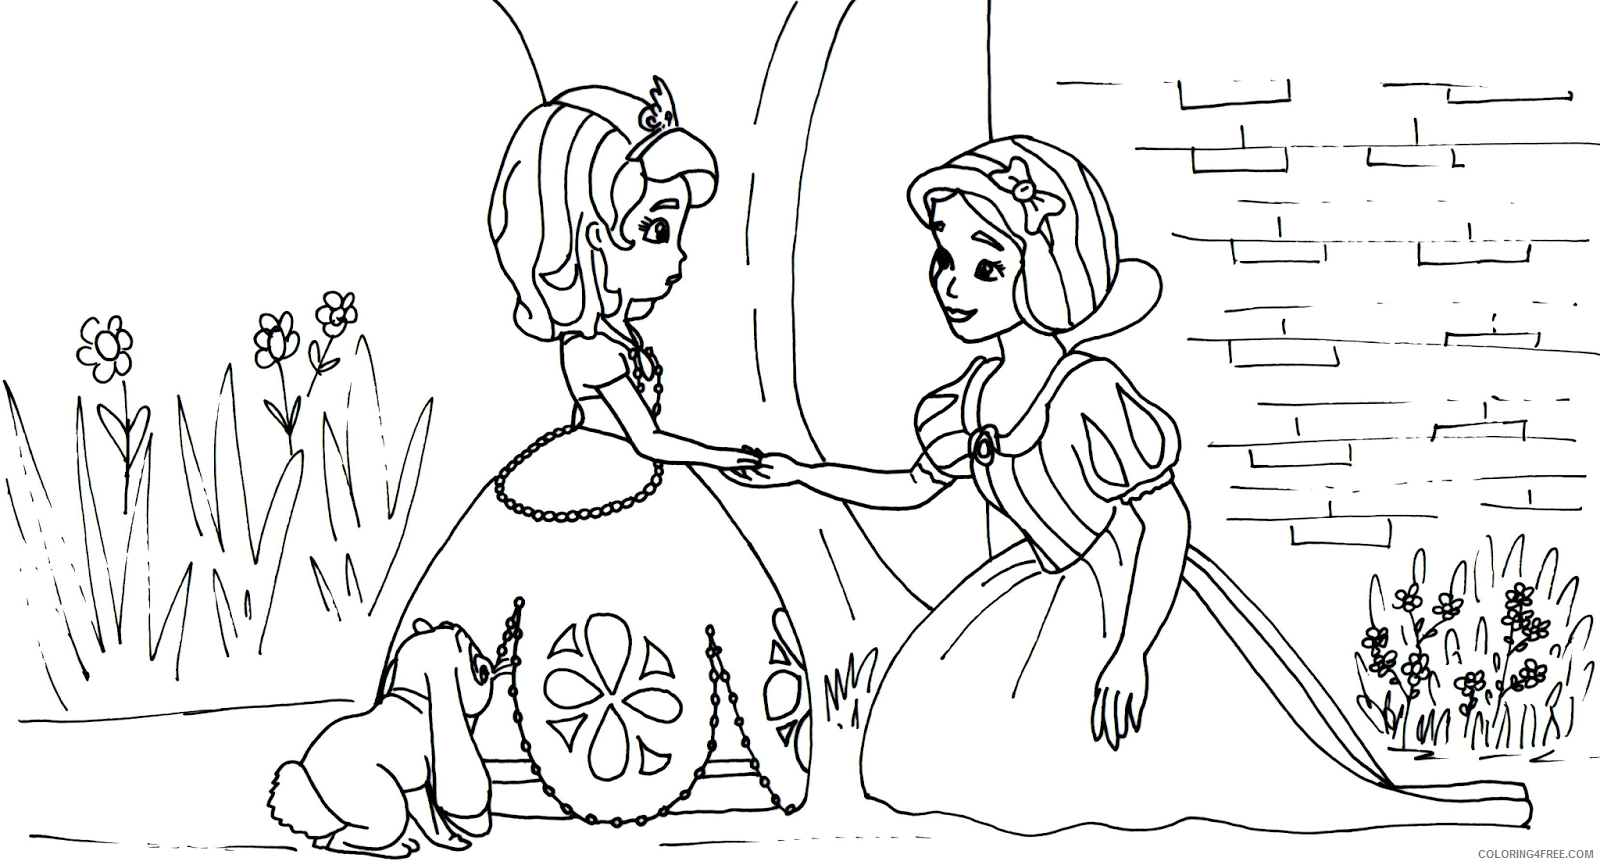 Sofia the First Coloring Pages Cartoons Printable Sofia the First Printable 2020 5838 Coloring4free